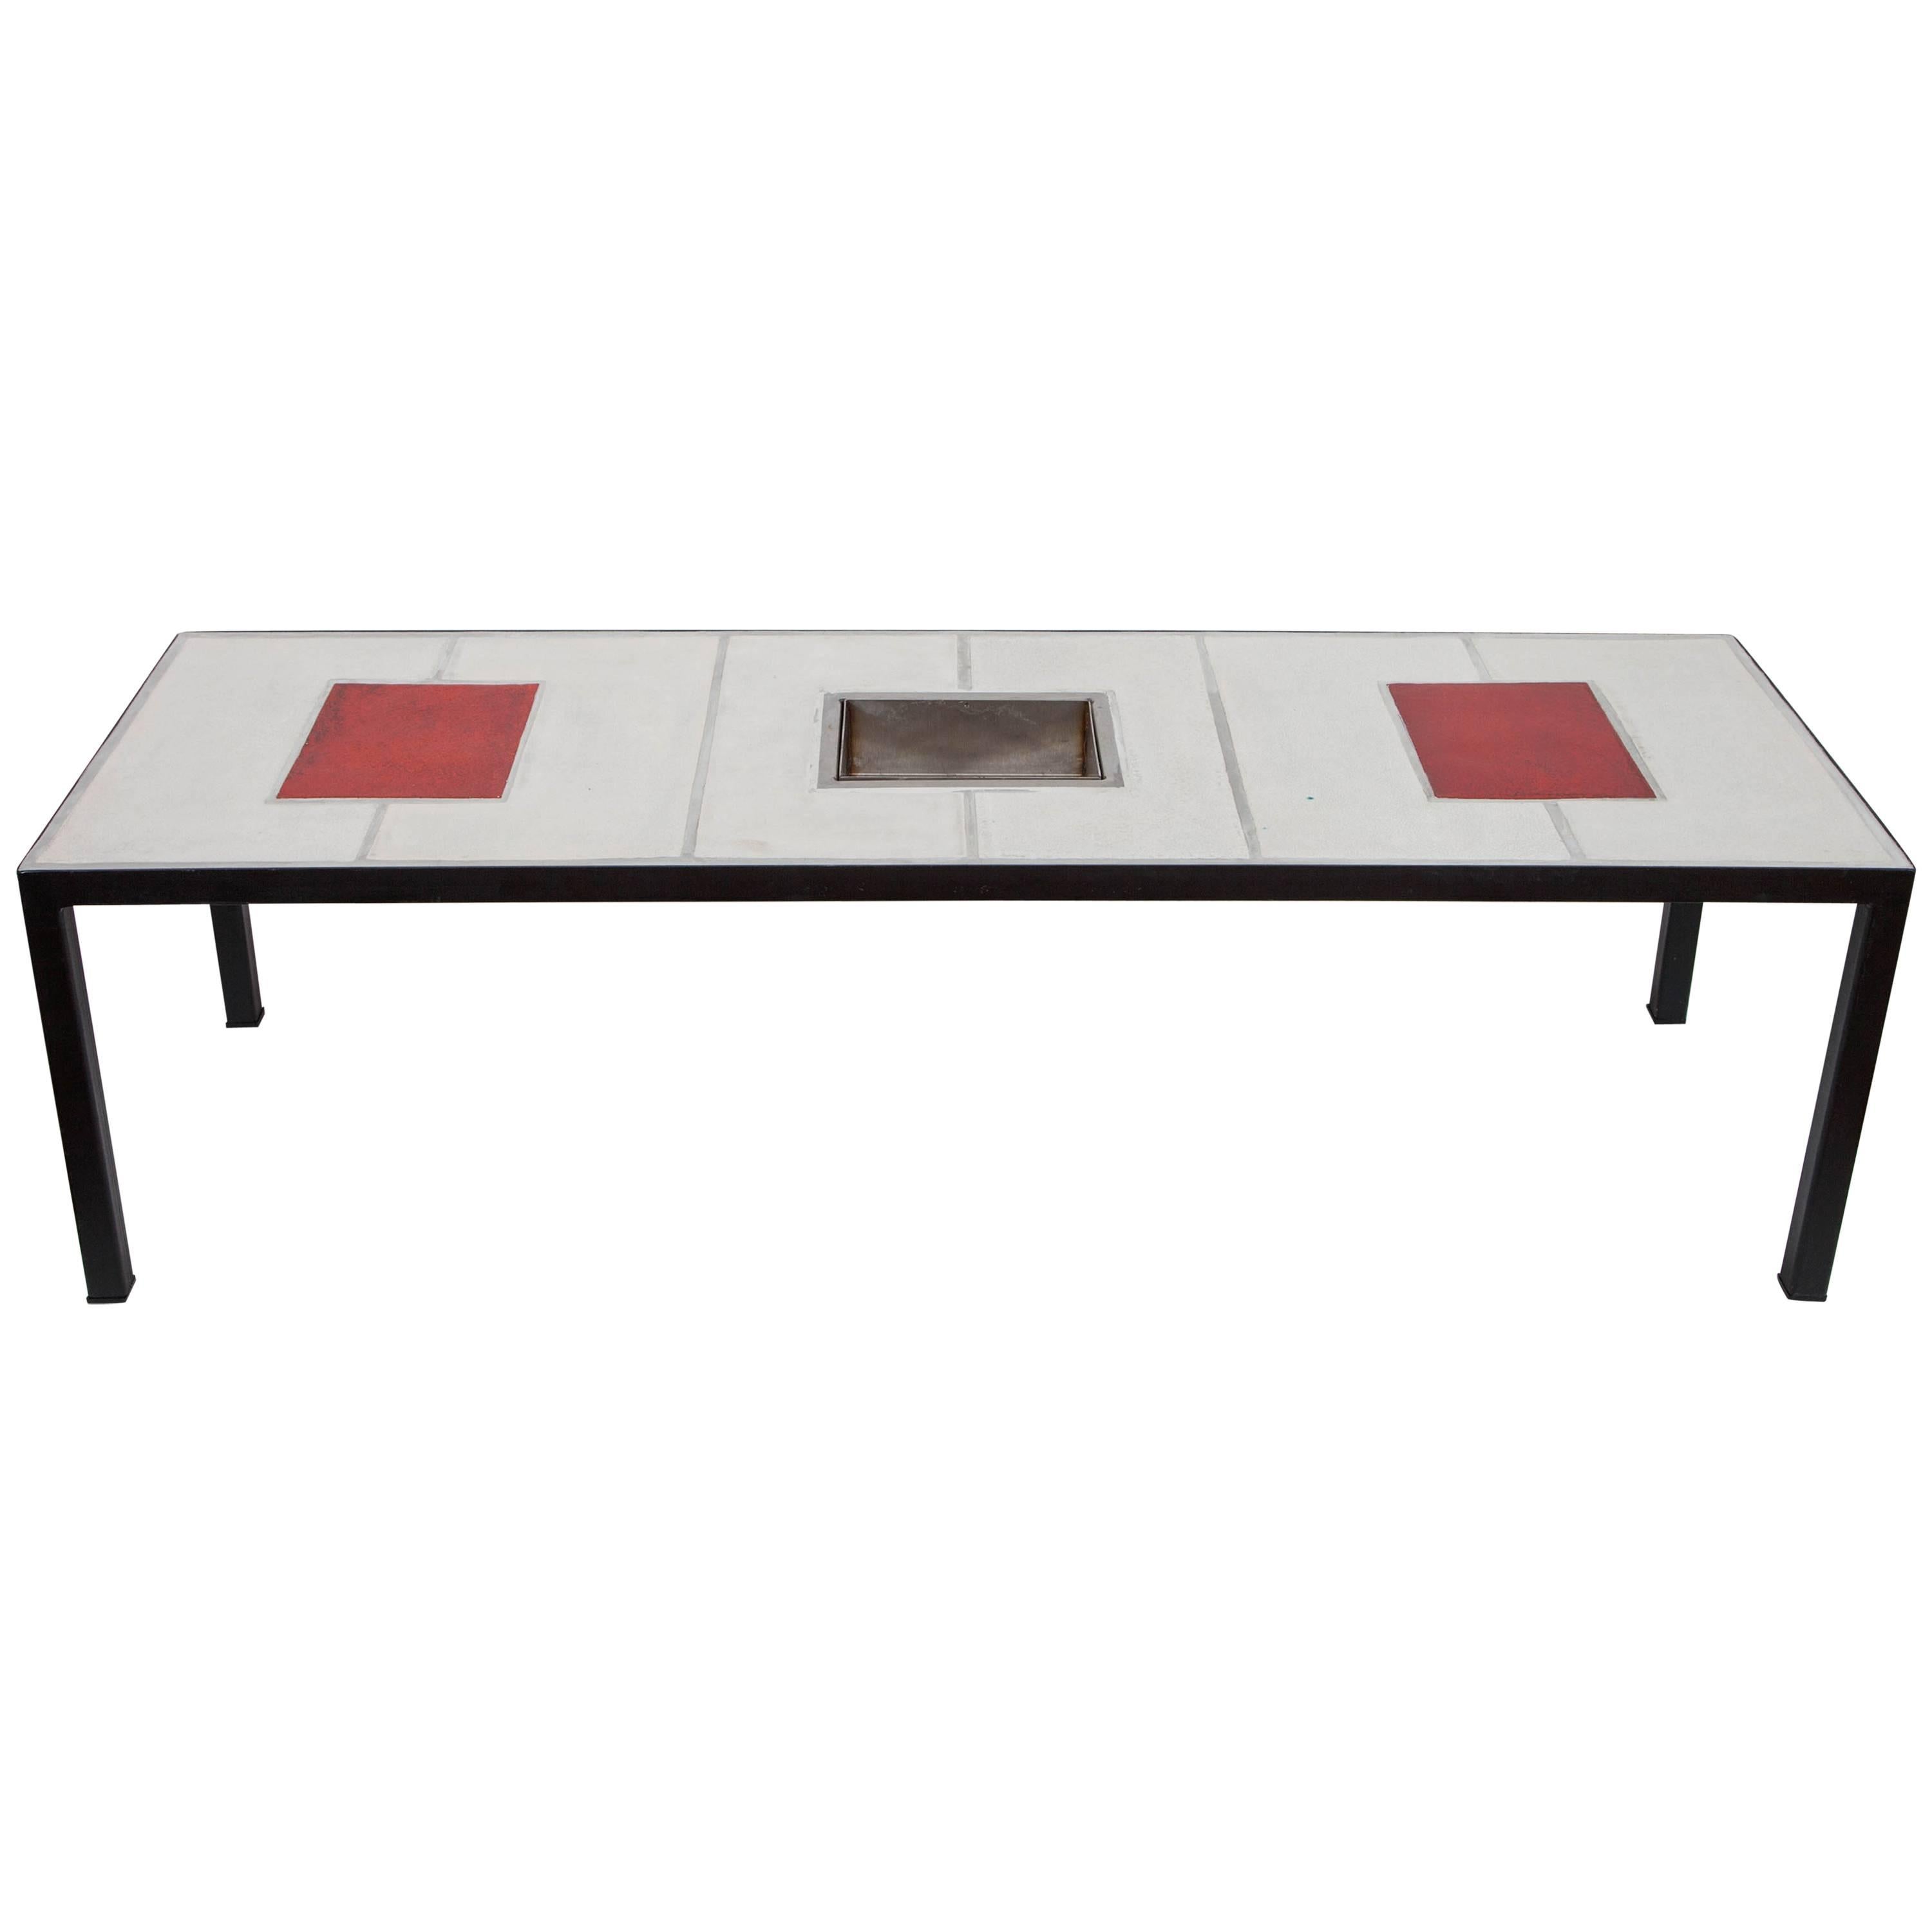 Marianne Vissiere, Ceramic Coffee Table with Planter For Sale